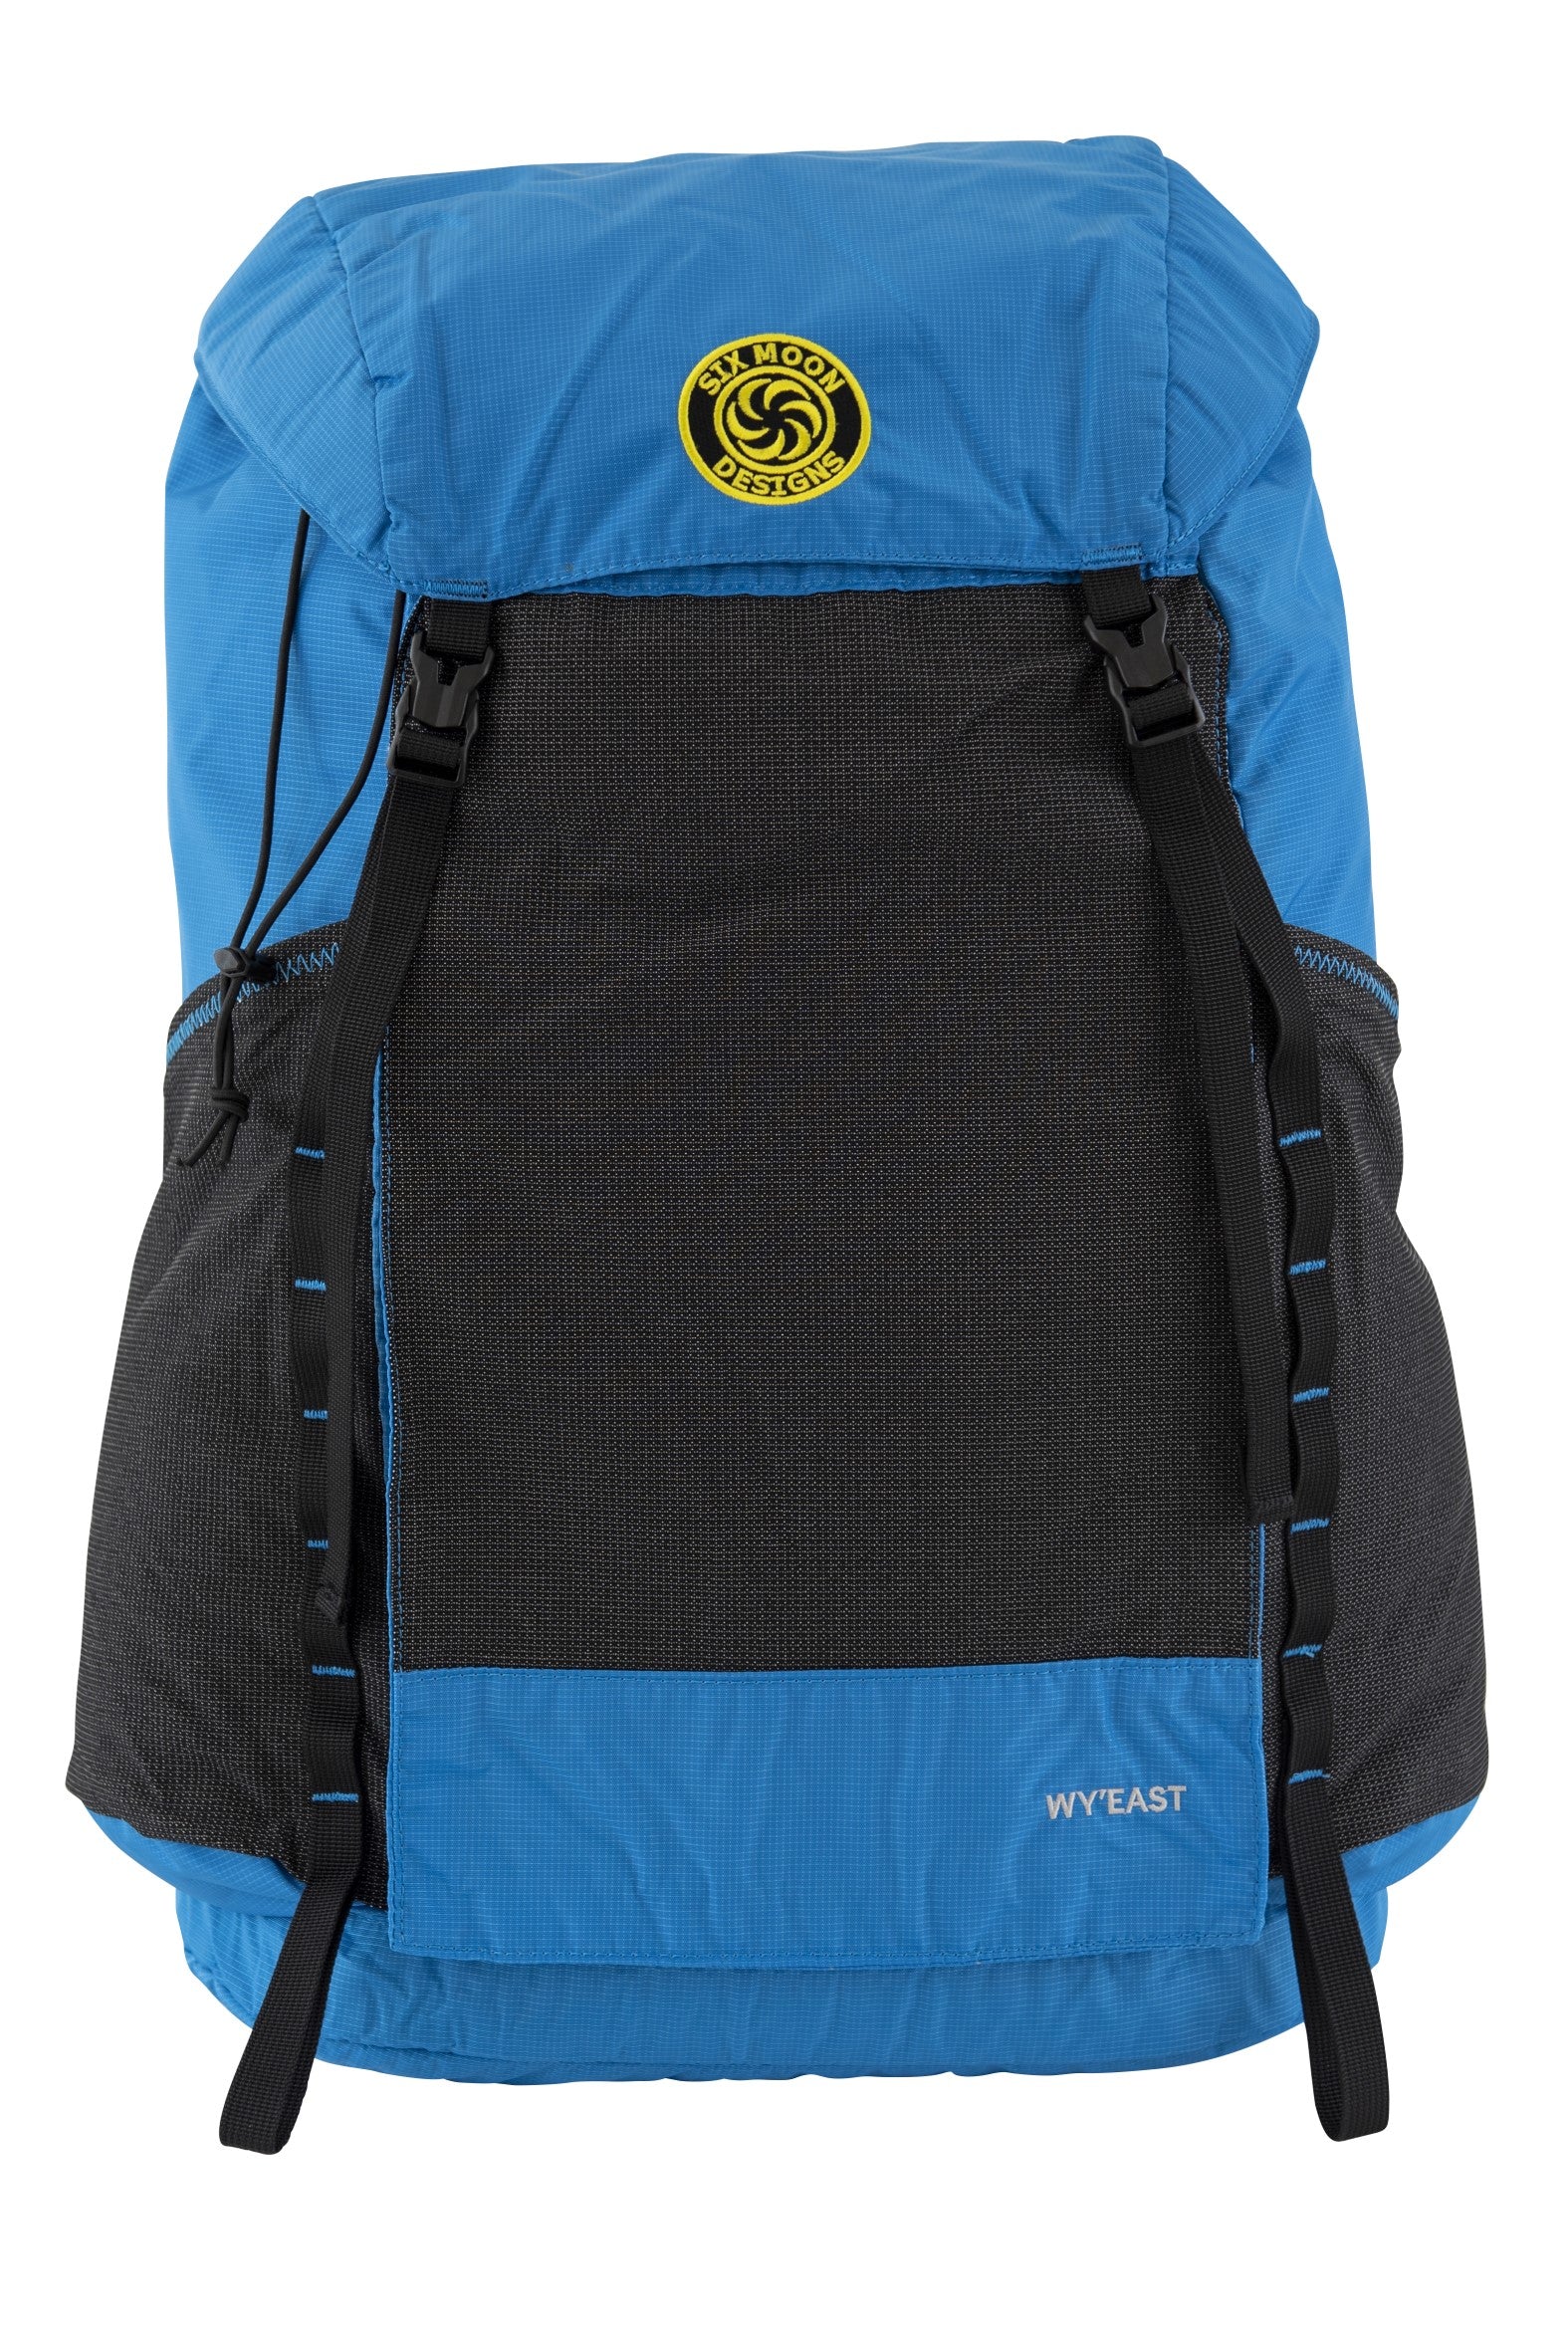 Wy'east Daypack